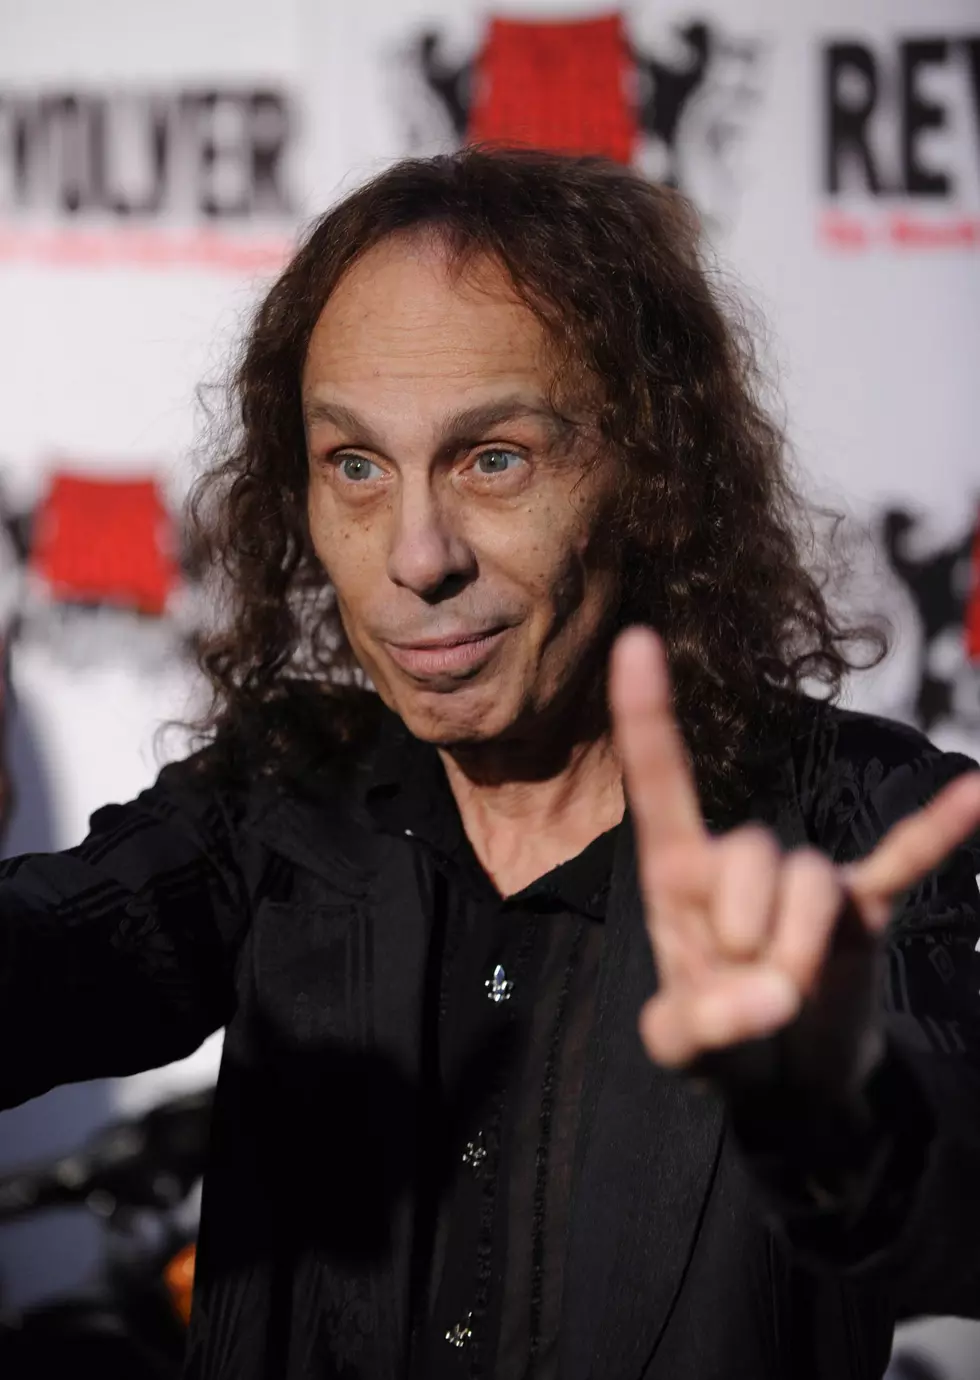 Ray’s Ray of Hope – Ronnie James Dio Tribute Album To Raises Funds for Cancer Cause